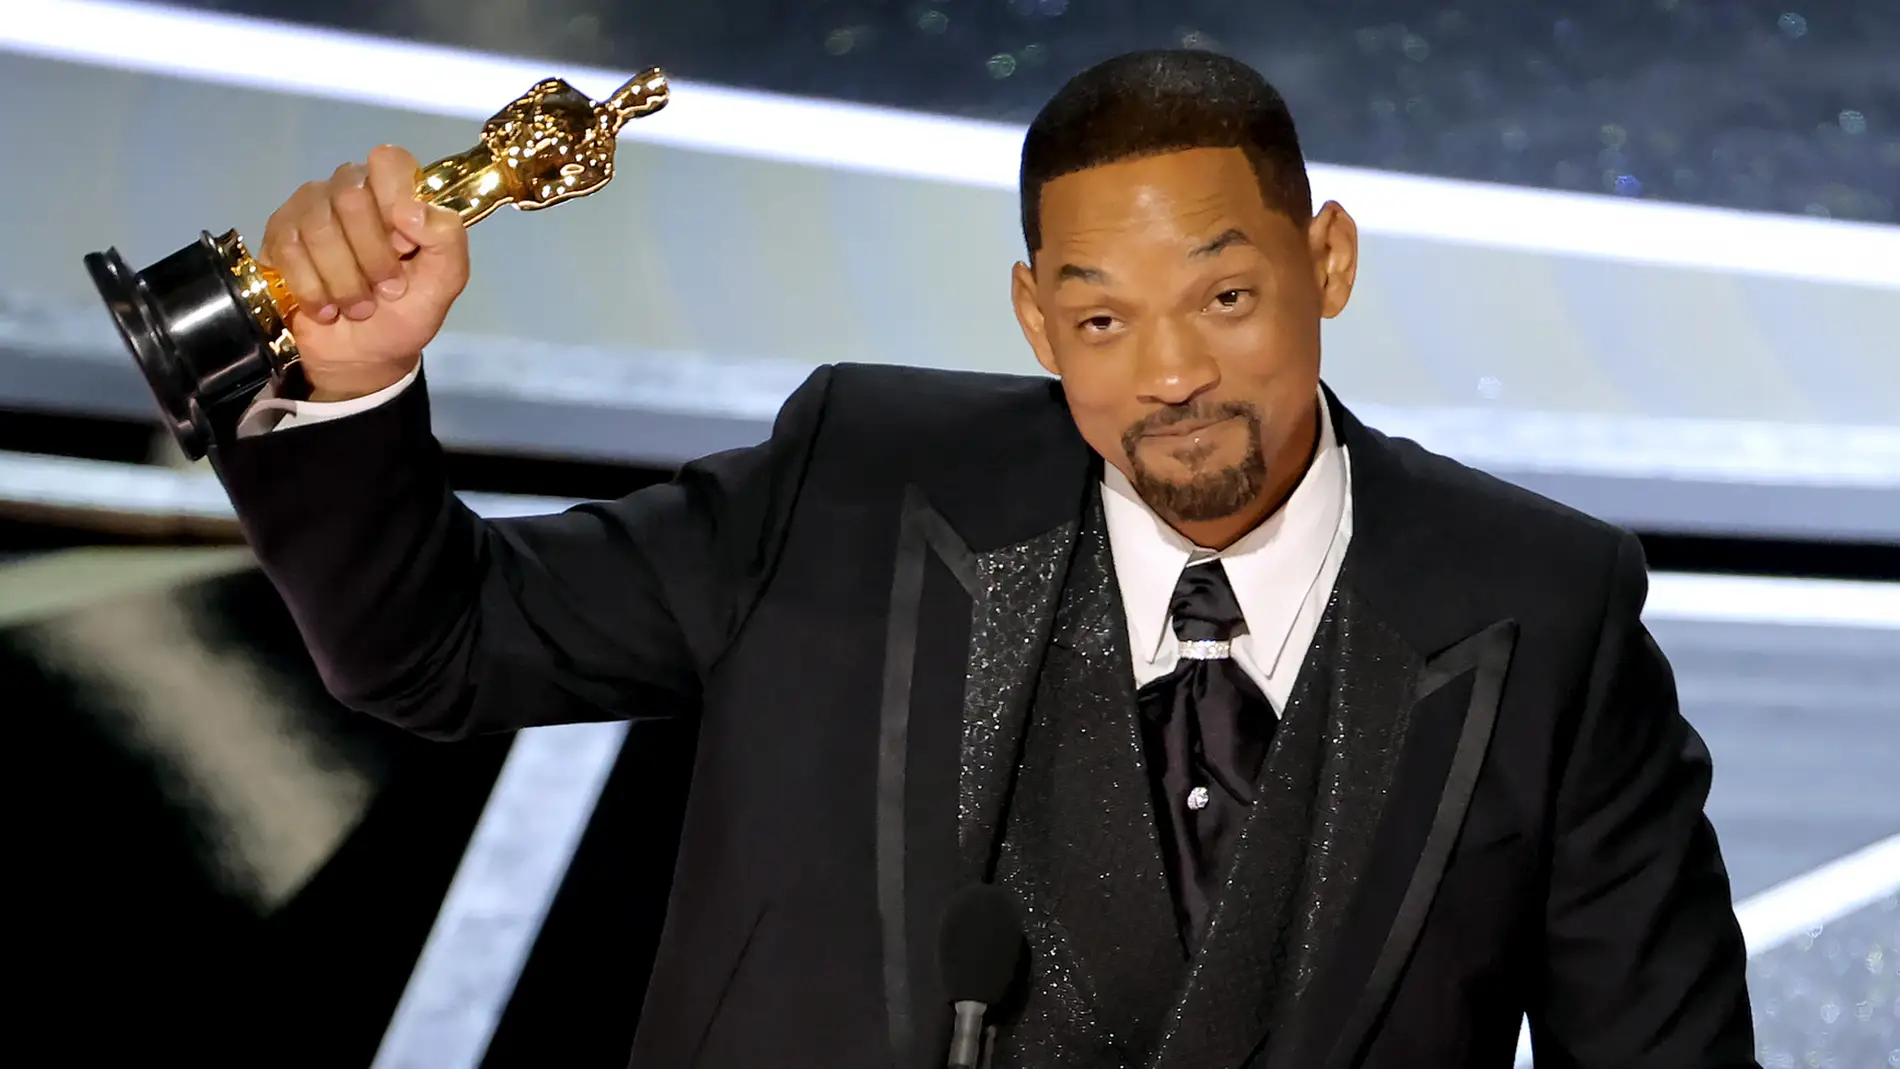 Actor Will Smith accepts an Oscar for The Williams Method